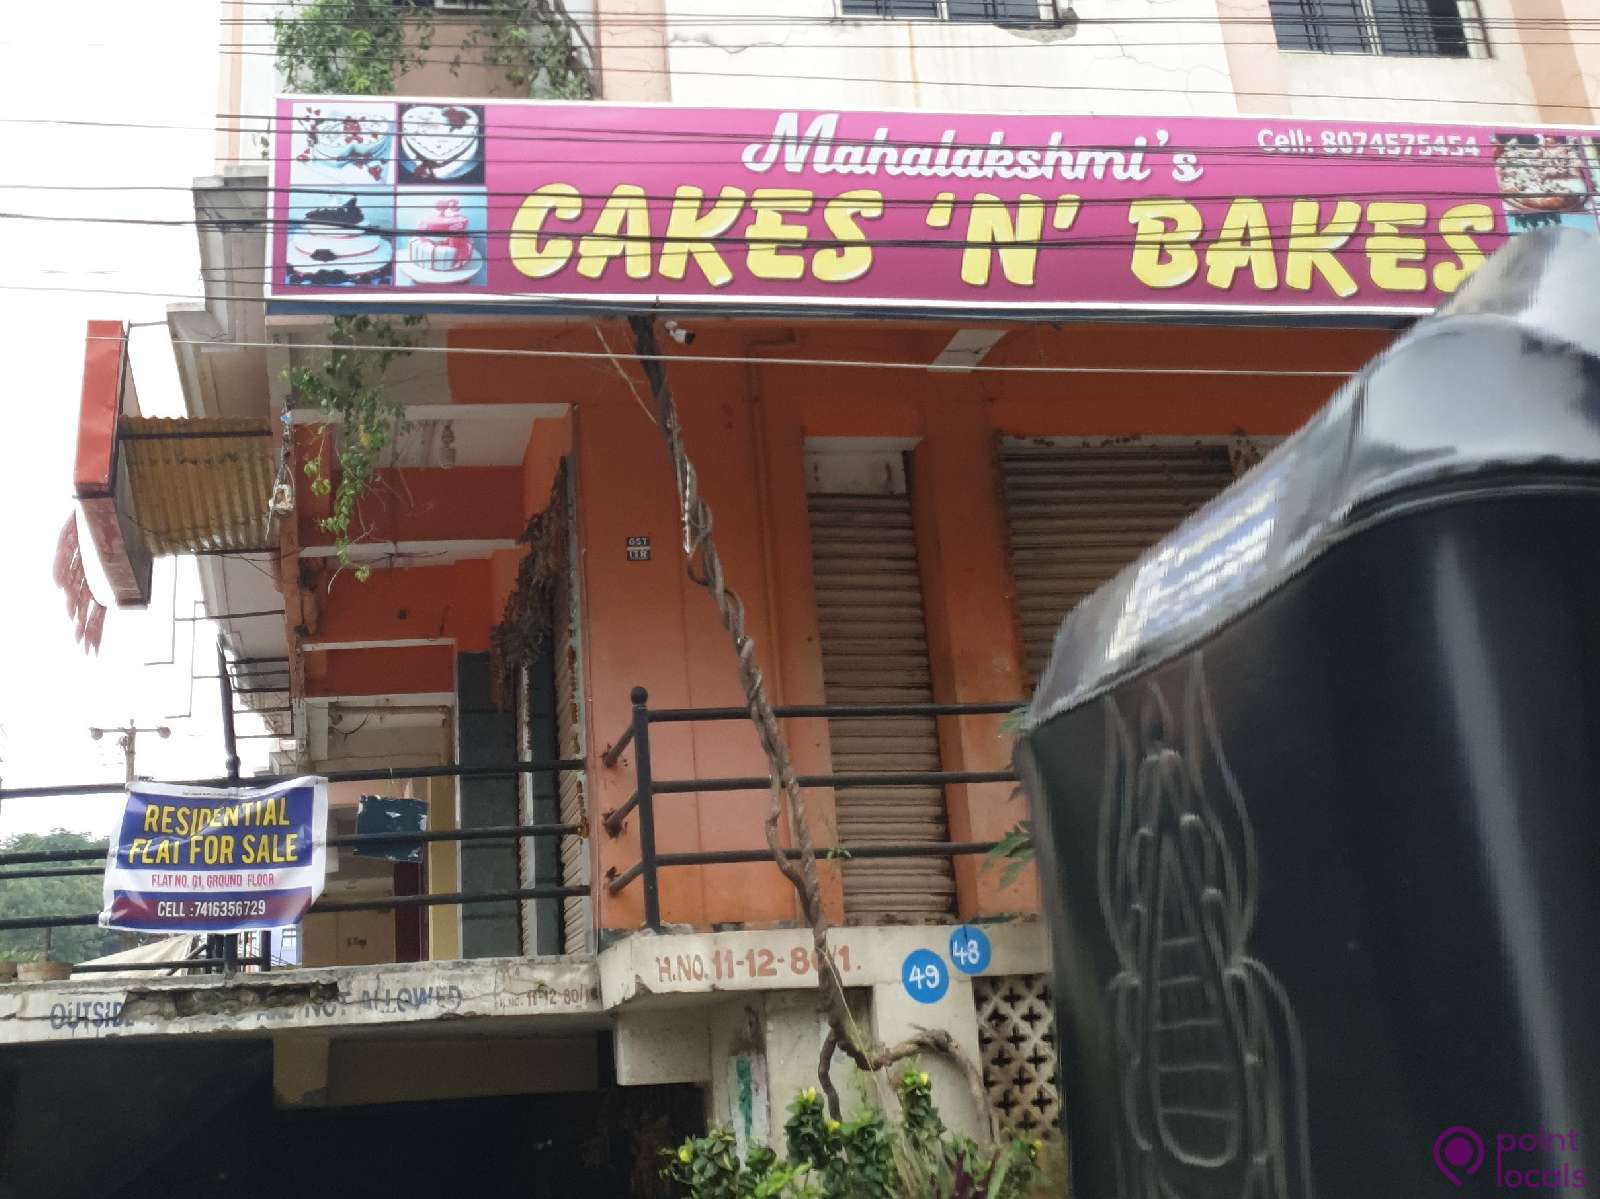 Cakes and bakes by Mehar - Wedding Cake - Pitampura - Weddingwire.in